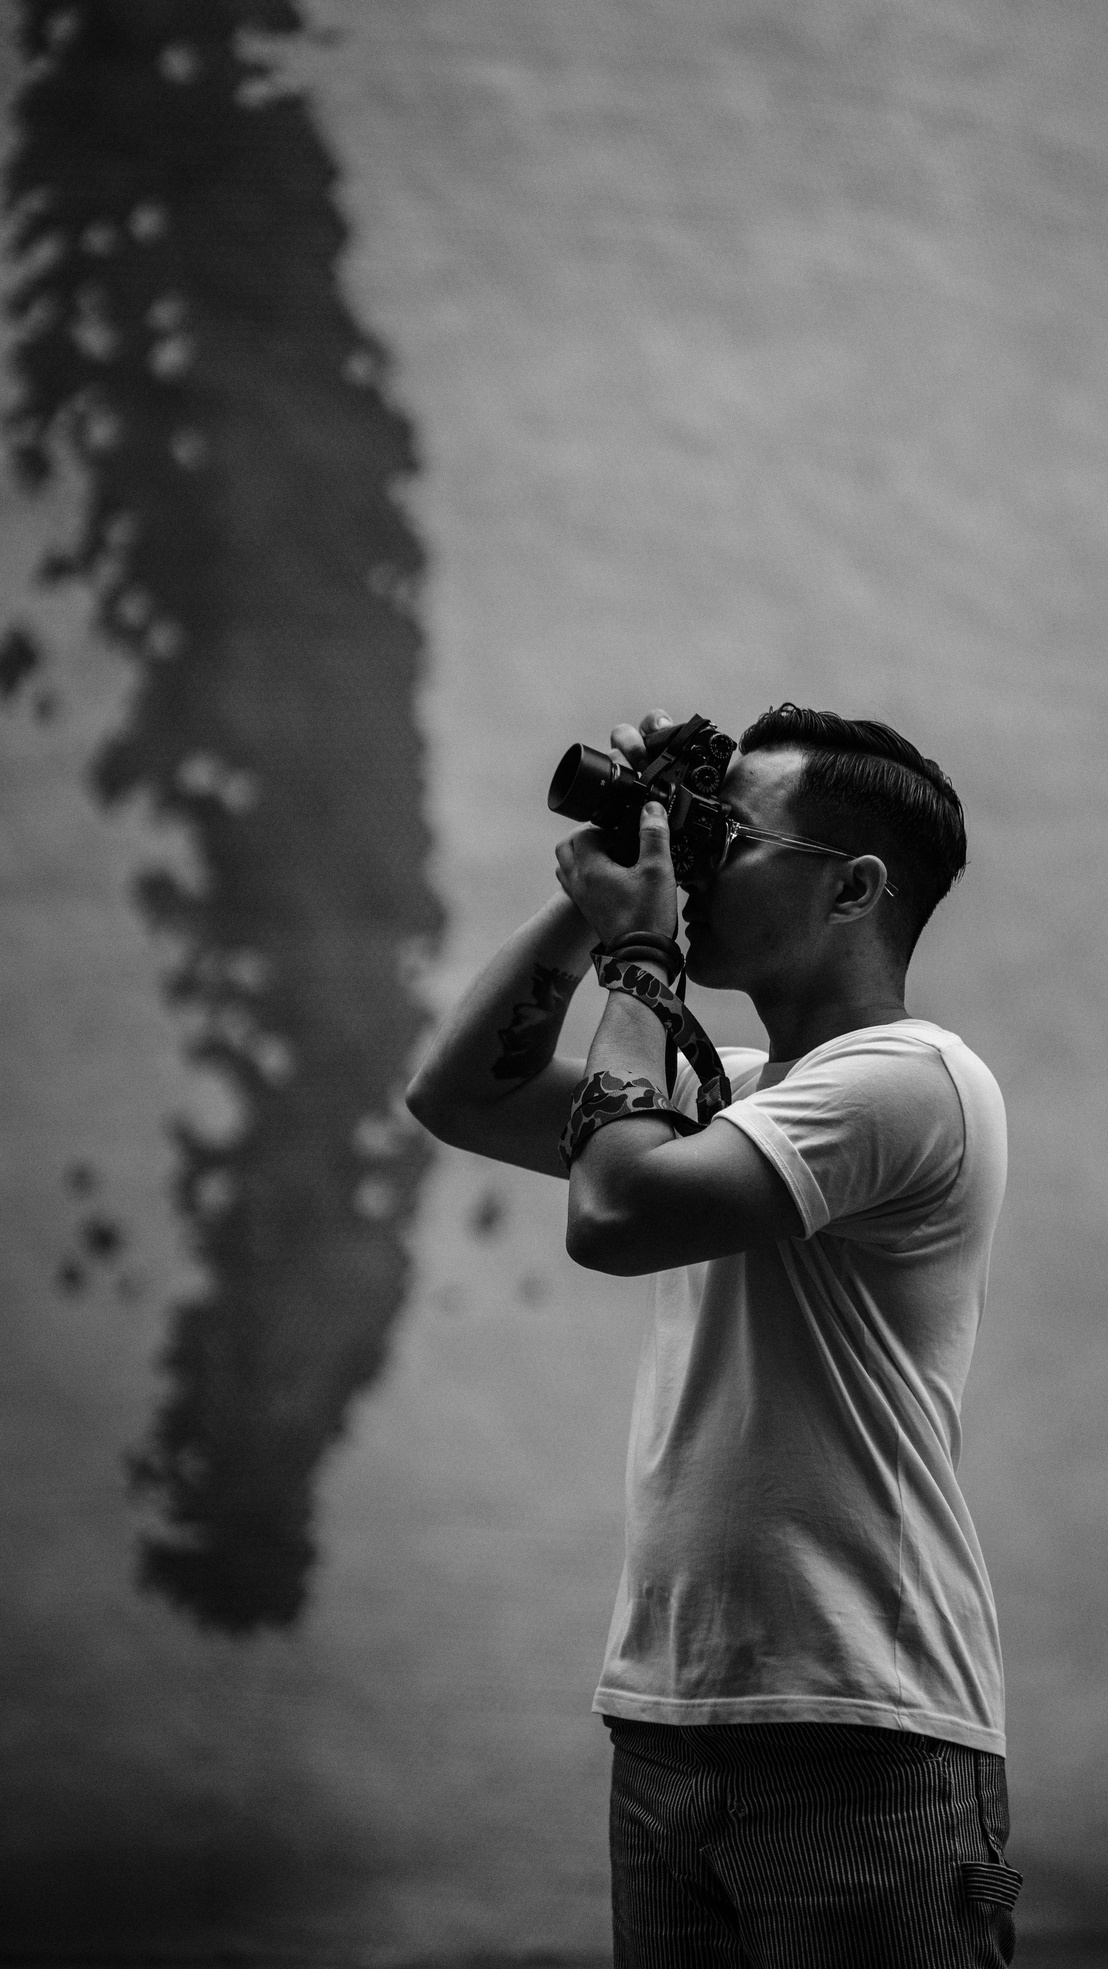 Grayscale Photo of Man Taking Pictures Using a Camera